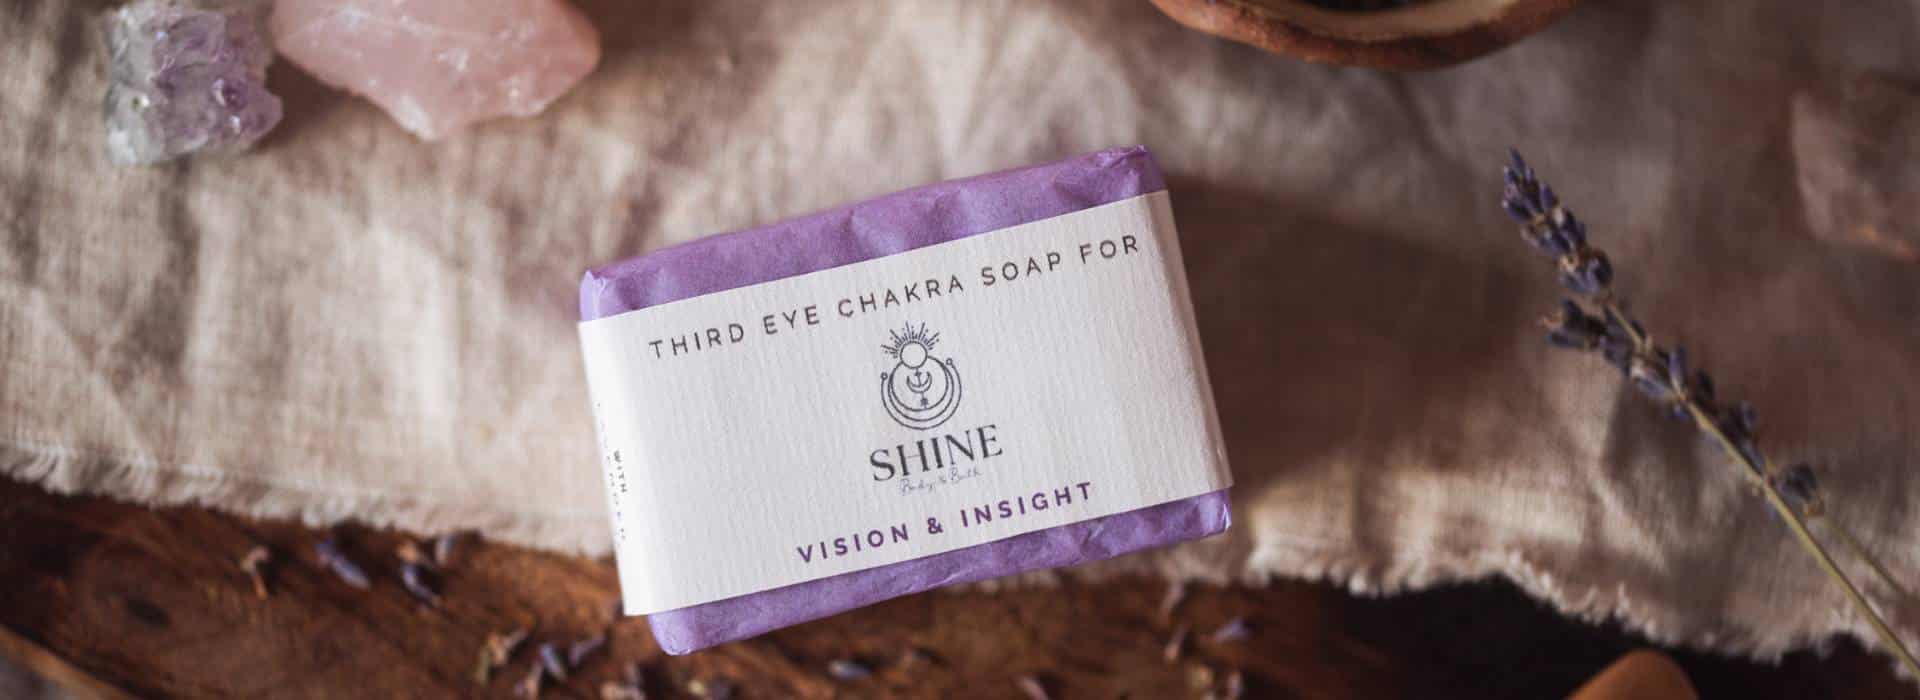 Third Eye Chakra Soap wrapped | 9 Different Ways to Use Shine Body & Bath Products | Blog